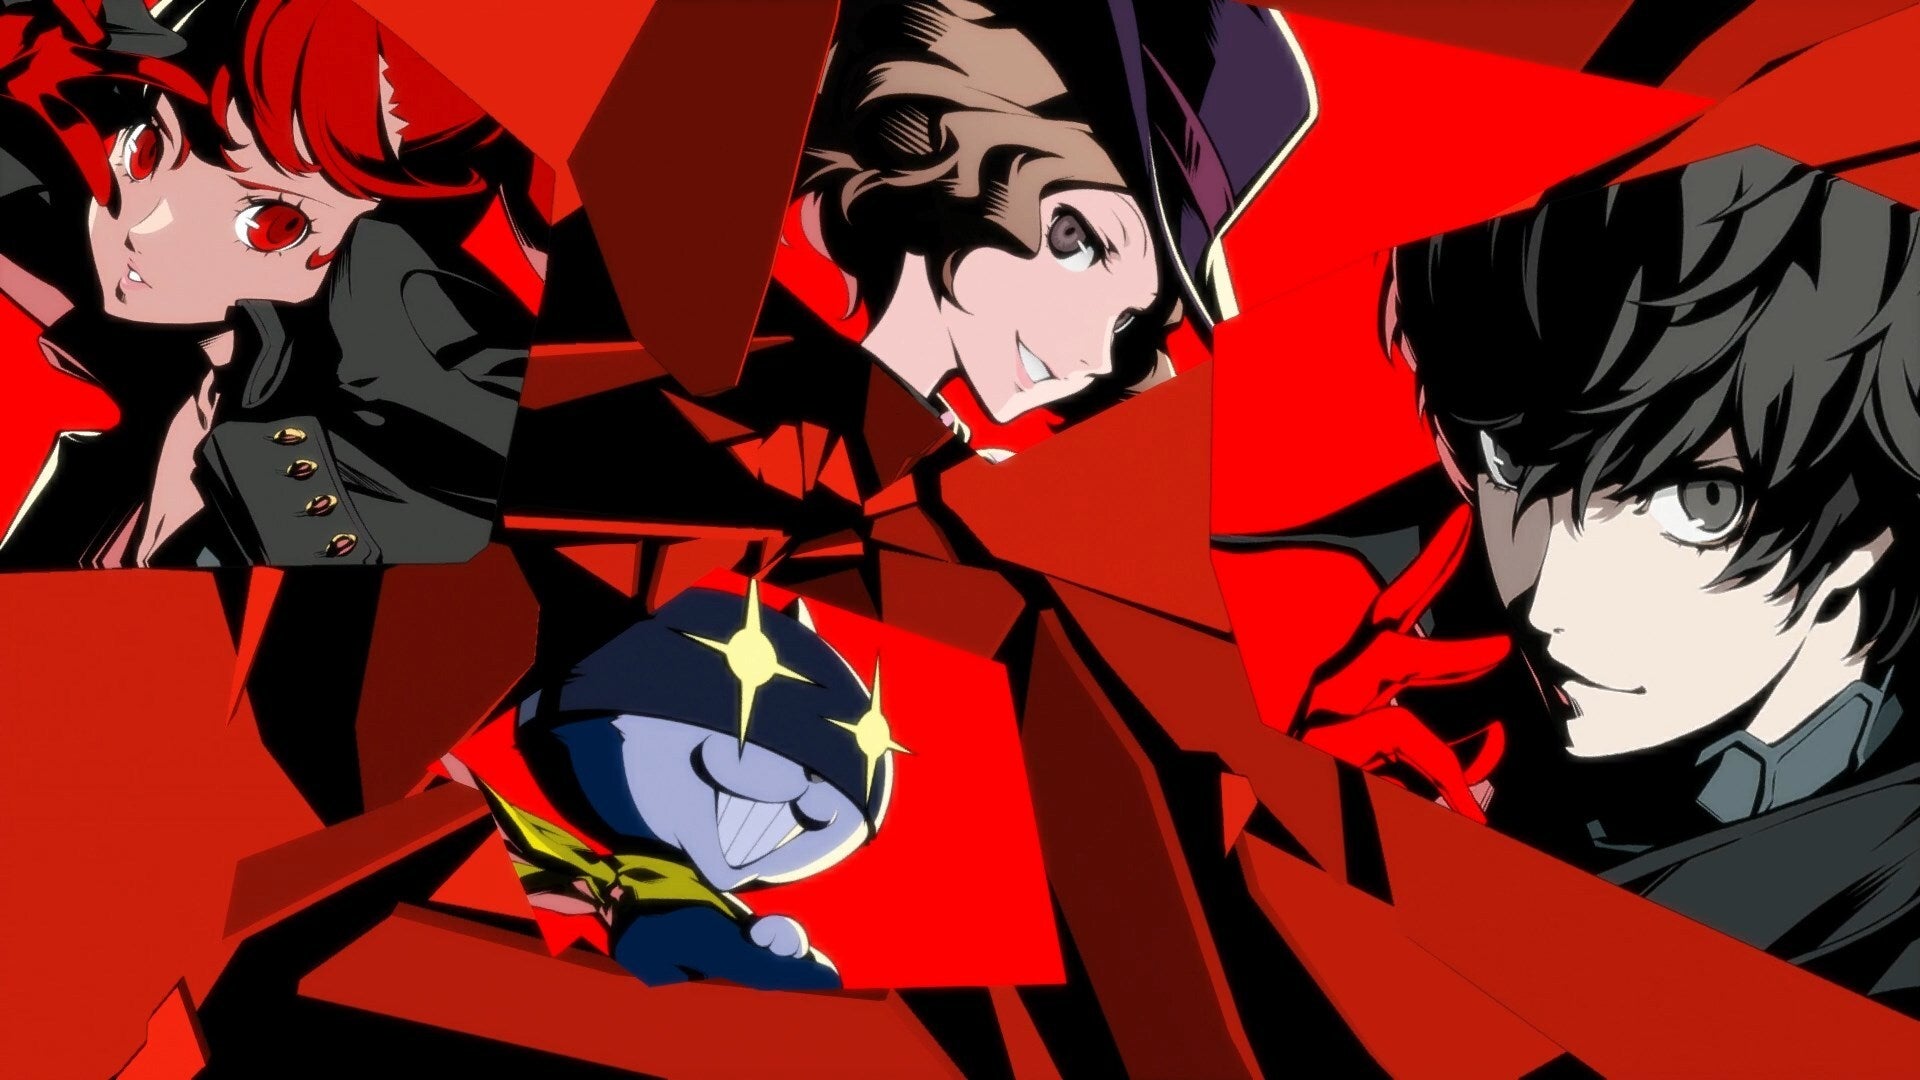 Persona 5 Royal coming to Switch this October - with Persona 3 and 4 to fol...